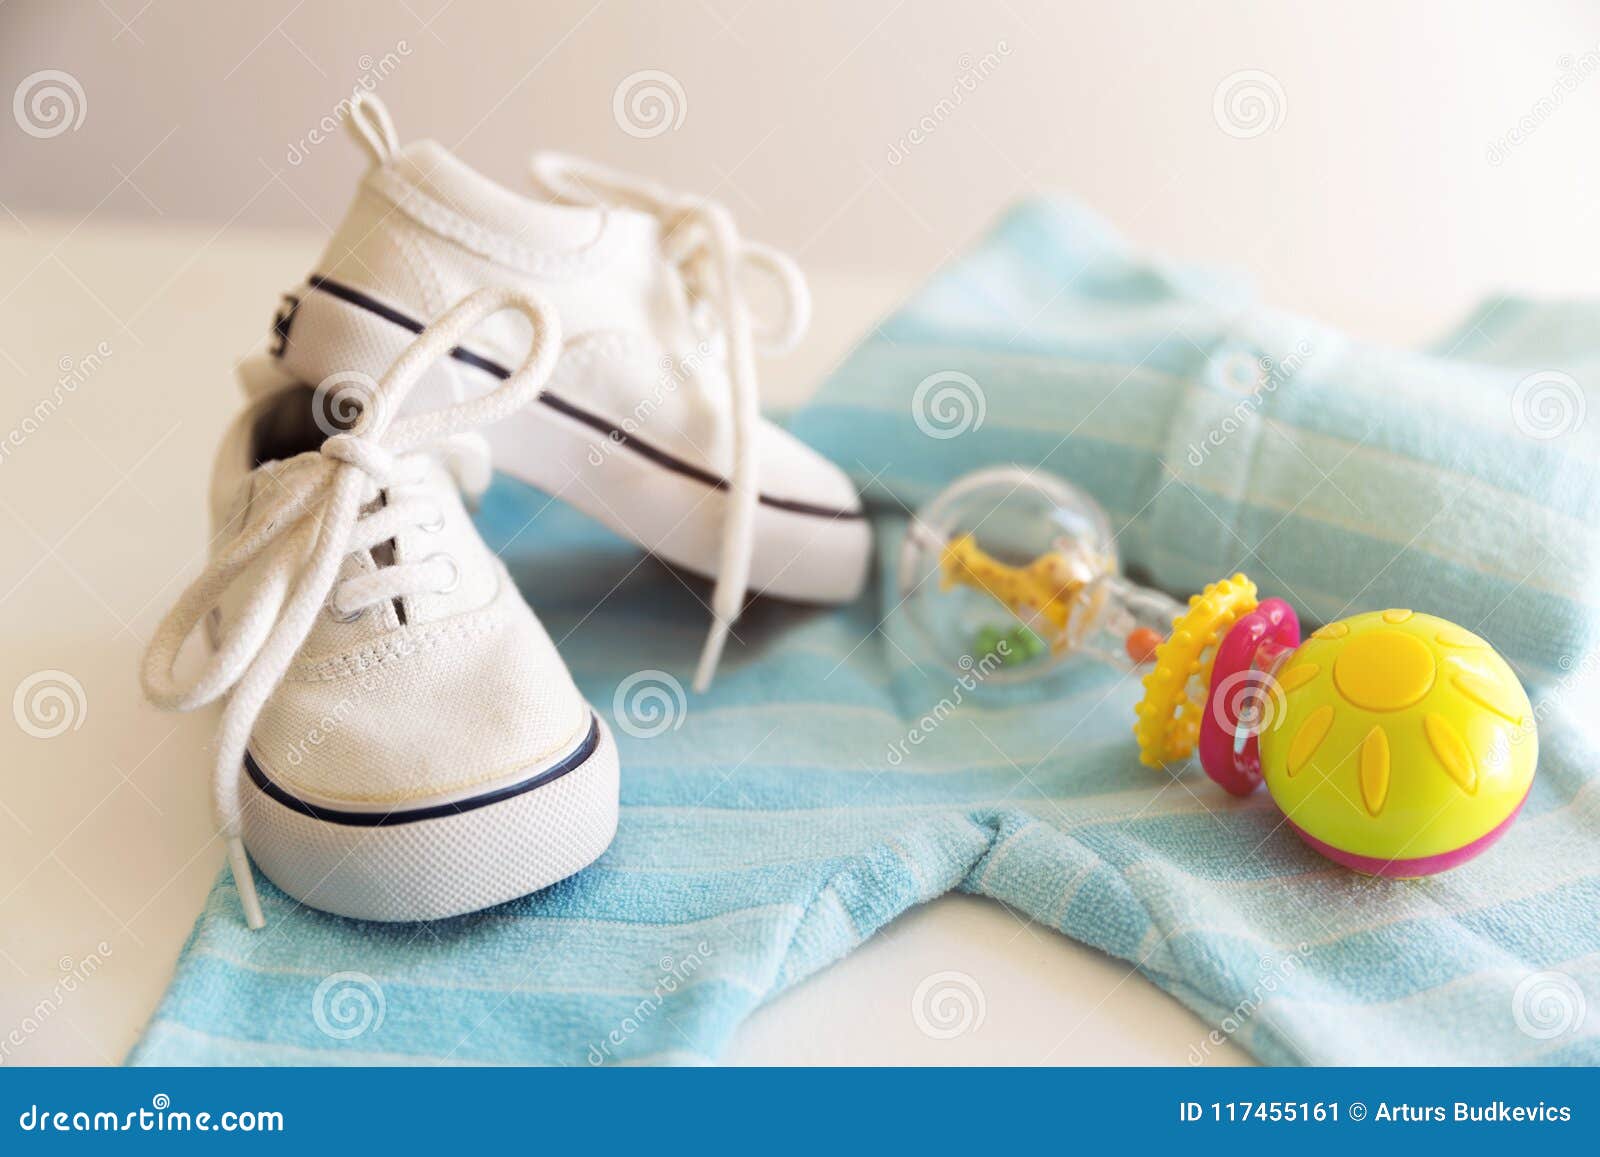 baby stuff is on a white background. things for little boy, rattle and shoes. newborn baby necessities.